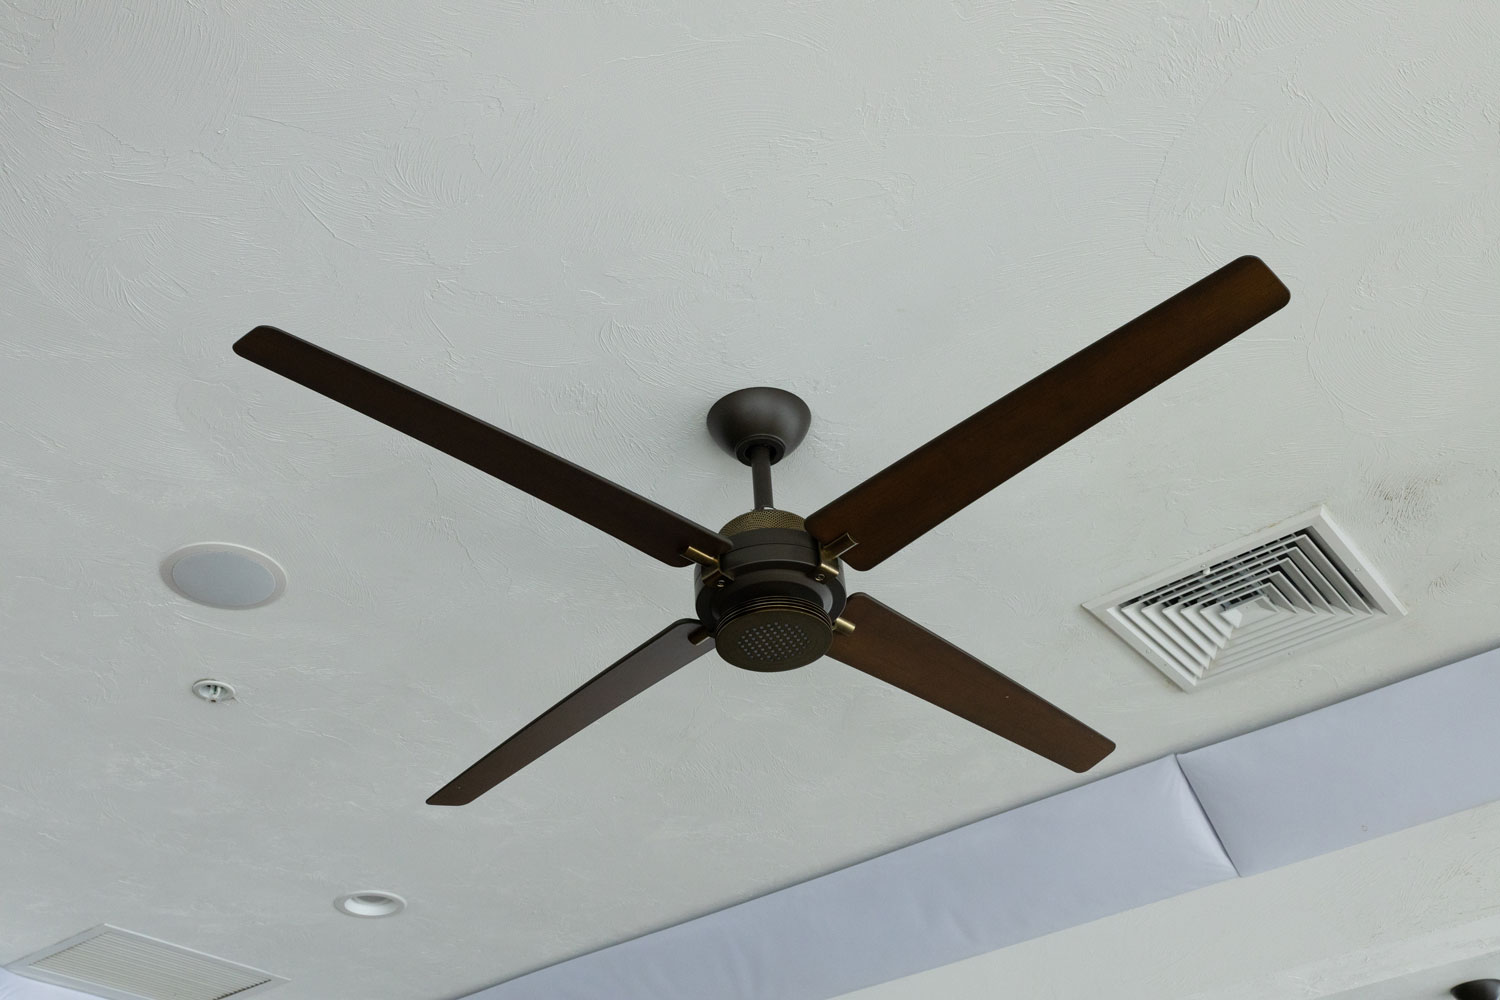 A black ceiling fan with long black blades